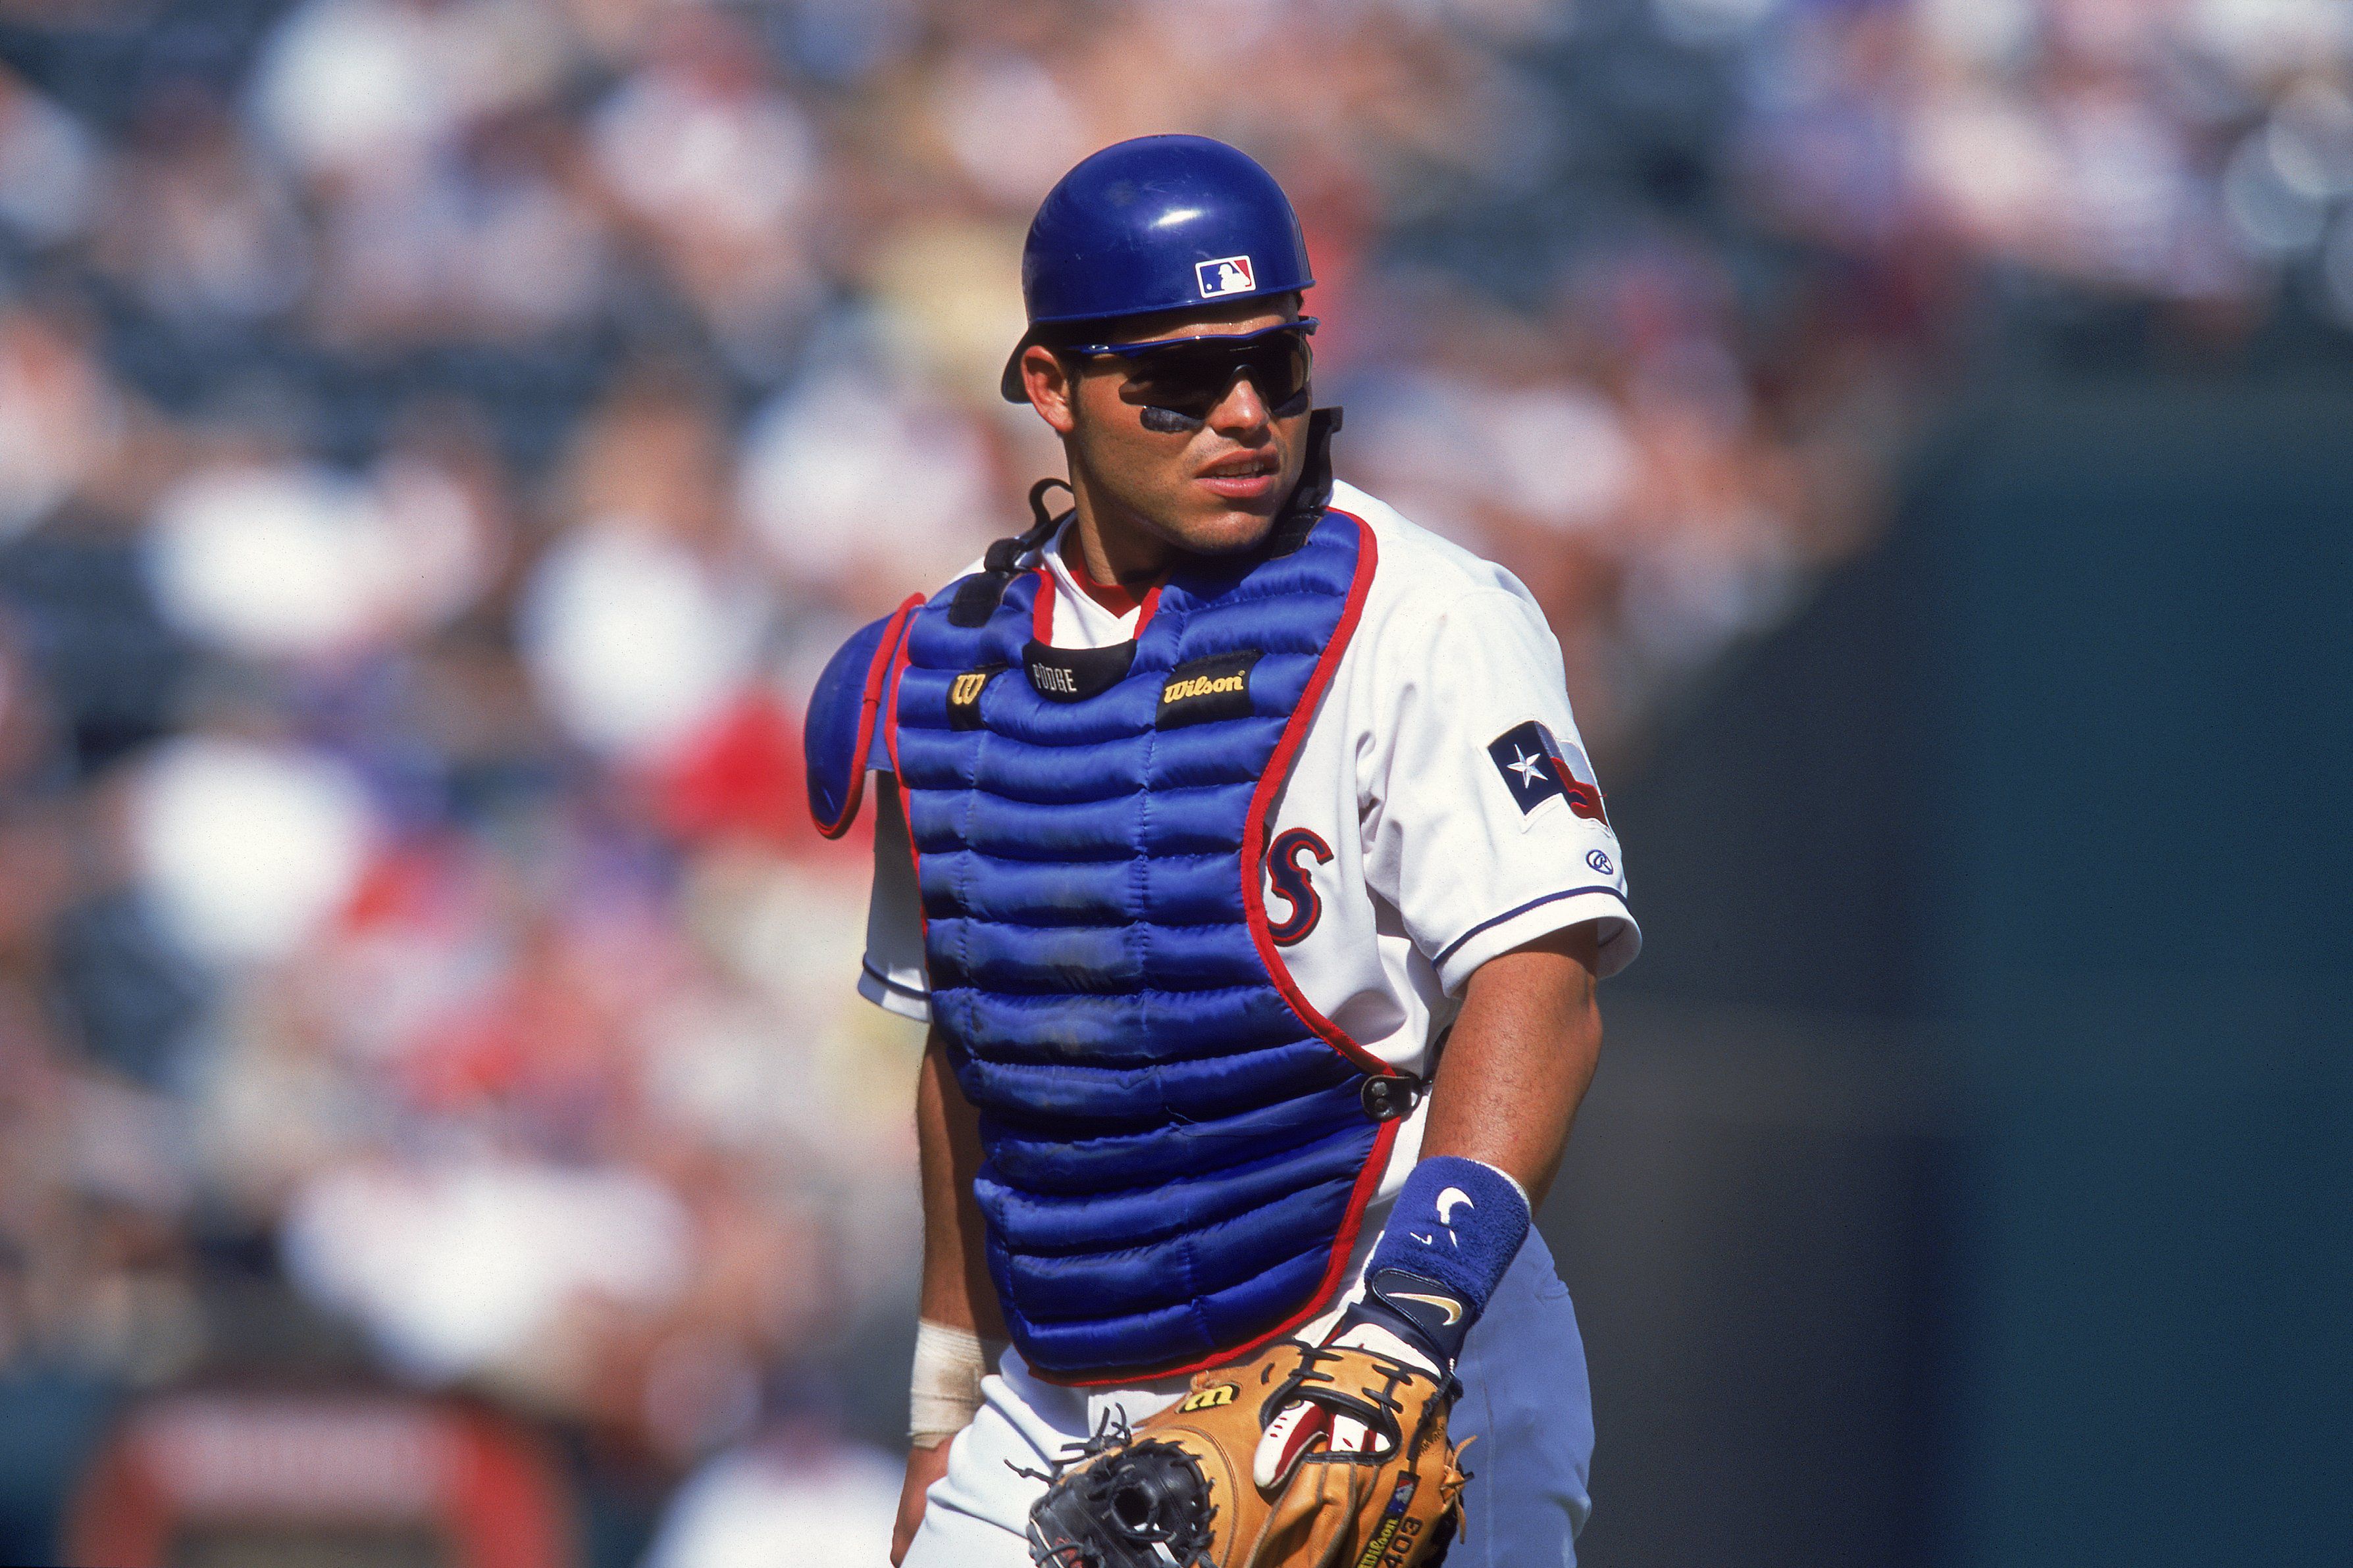 September 29, 2019: Former Texas Ranger Ivan ''Pudge'' Rodriguez is  recognized as a member of the All Rangers Team after the final Major League  Baseball game held at Globe Life Park between